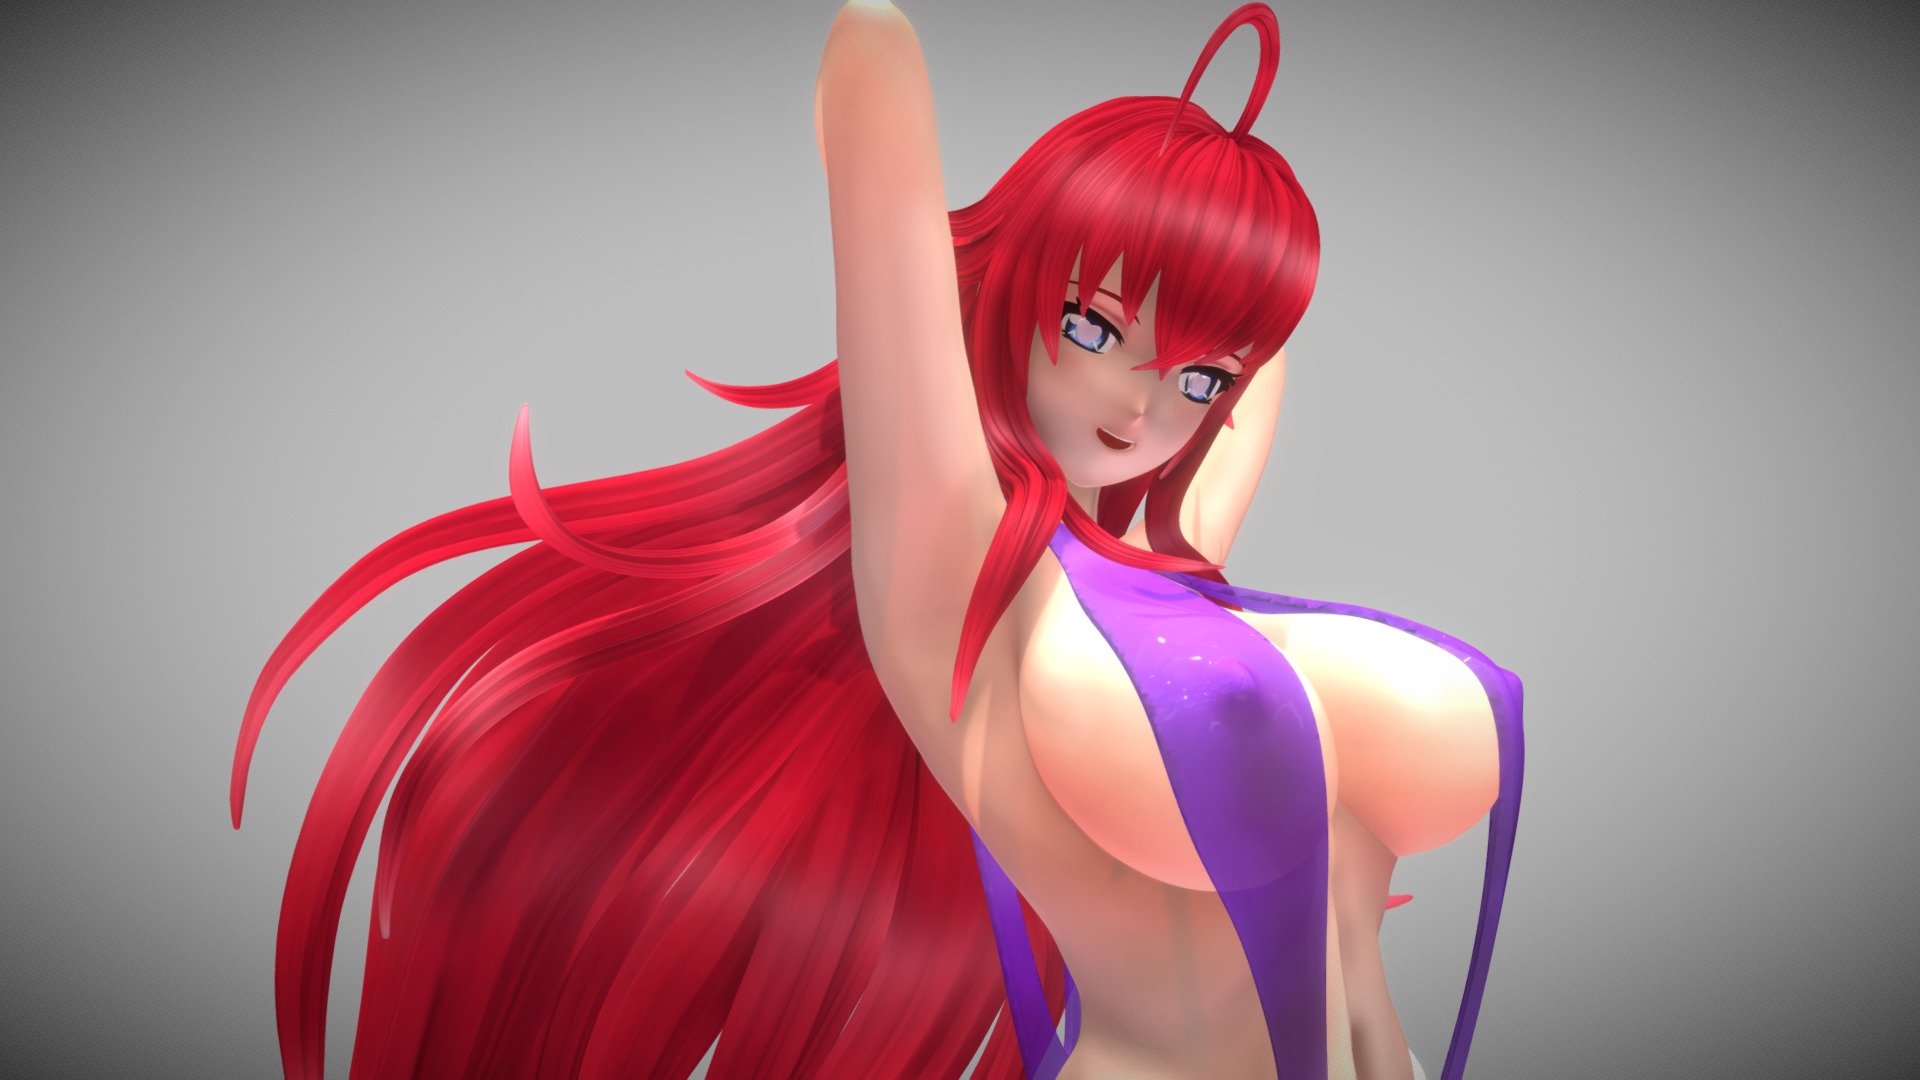 【Niconico】
https://www.nicovideo.jp/watch/sm40994138

https://www.nicovideo.jp/watch/sm41229433

【Rias Gremory Slingshot Ver.】Fanart
【リアス・グレモリー スリングショットVer.】ふぁんあ～と

【DeepL English】
Holy slingshots!
At first I didn't know what a slingshot was and thought it was a string swimsuit.
I was impressed when I saw Rias-sama's slingshot in the anime (High School DxD).
I was impressed when I saw the slingshot of Rias-sama in the anime (High School DxD). I thought.

【JP】
紐水着(スリングショット)最高だぜぇ(・∀・)
むかしむかし、スリングショットって名前を知らず紐水着だと思っていた頃。
アニメ(ハイスクールD×D)でリアス様のスリングショットを観て感動したのさ。 - Rias Gremory Slingshot Ver 3d model